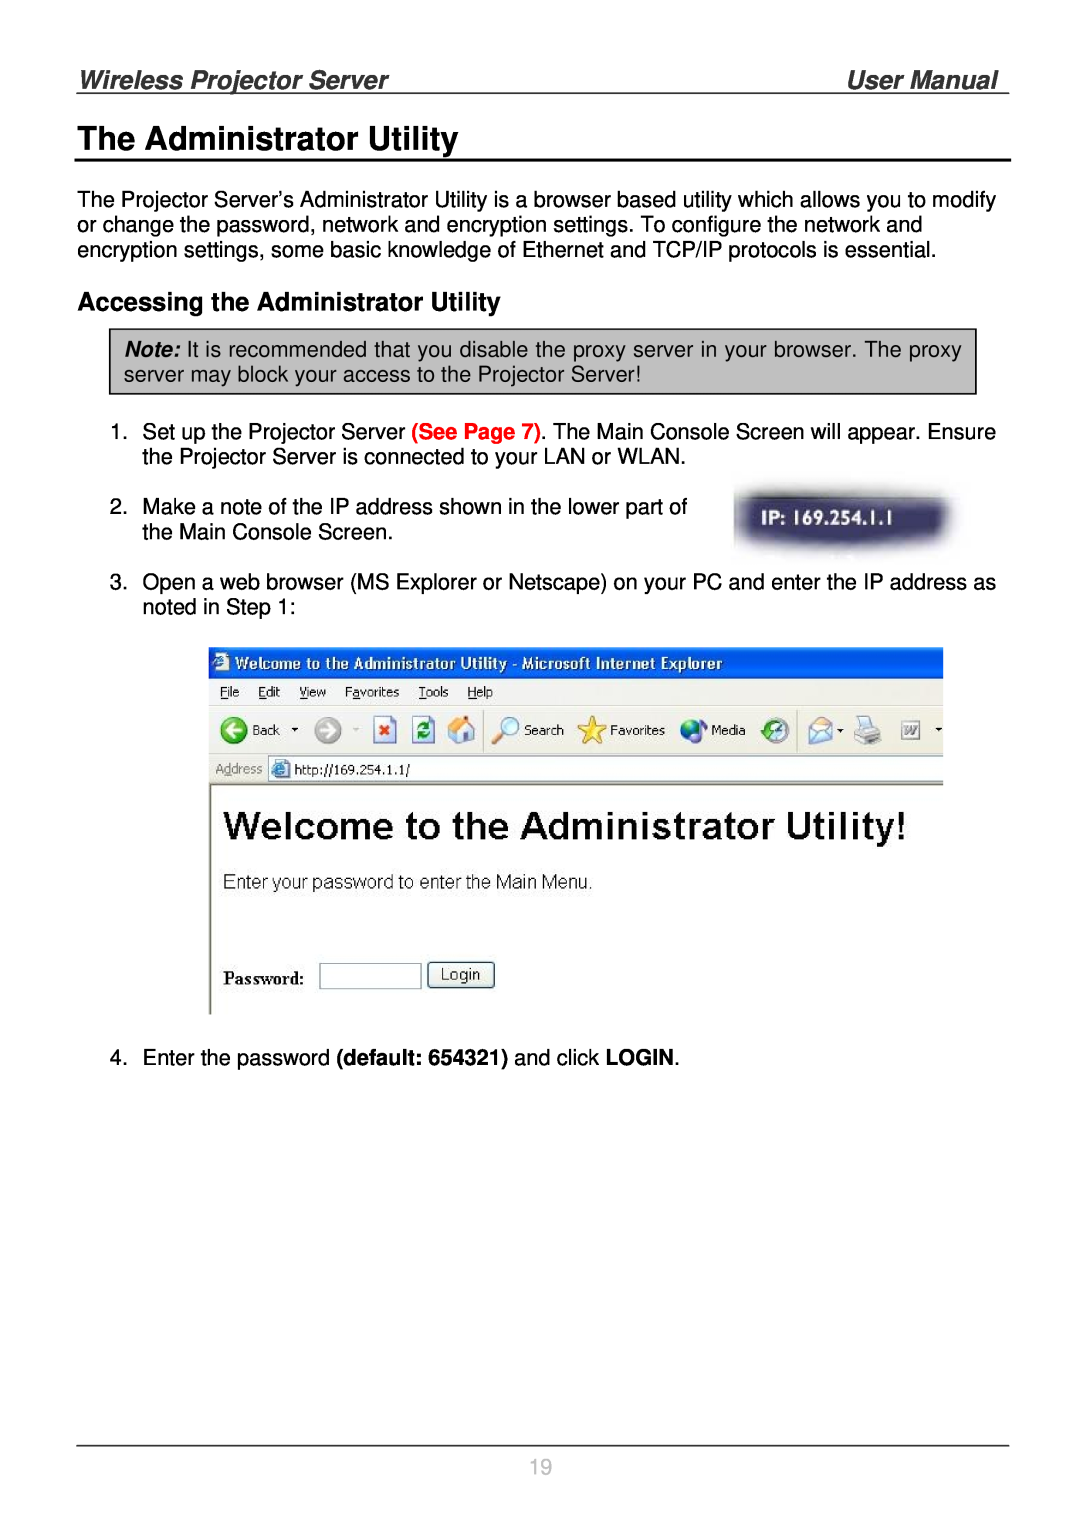 Lindy 32500 user manual The Administrator Utility, Accessing the Administrator Utility, Wireless Projector Server 